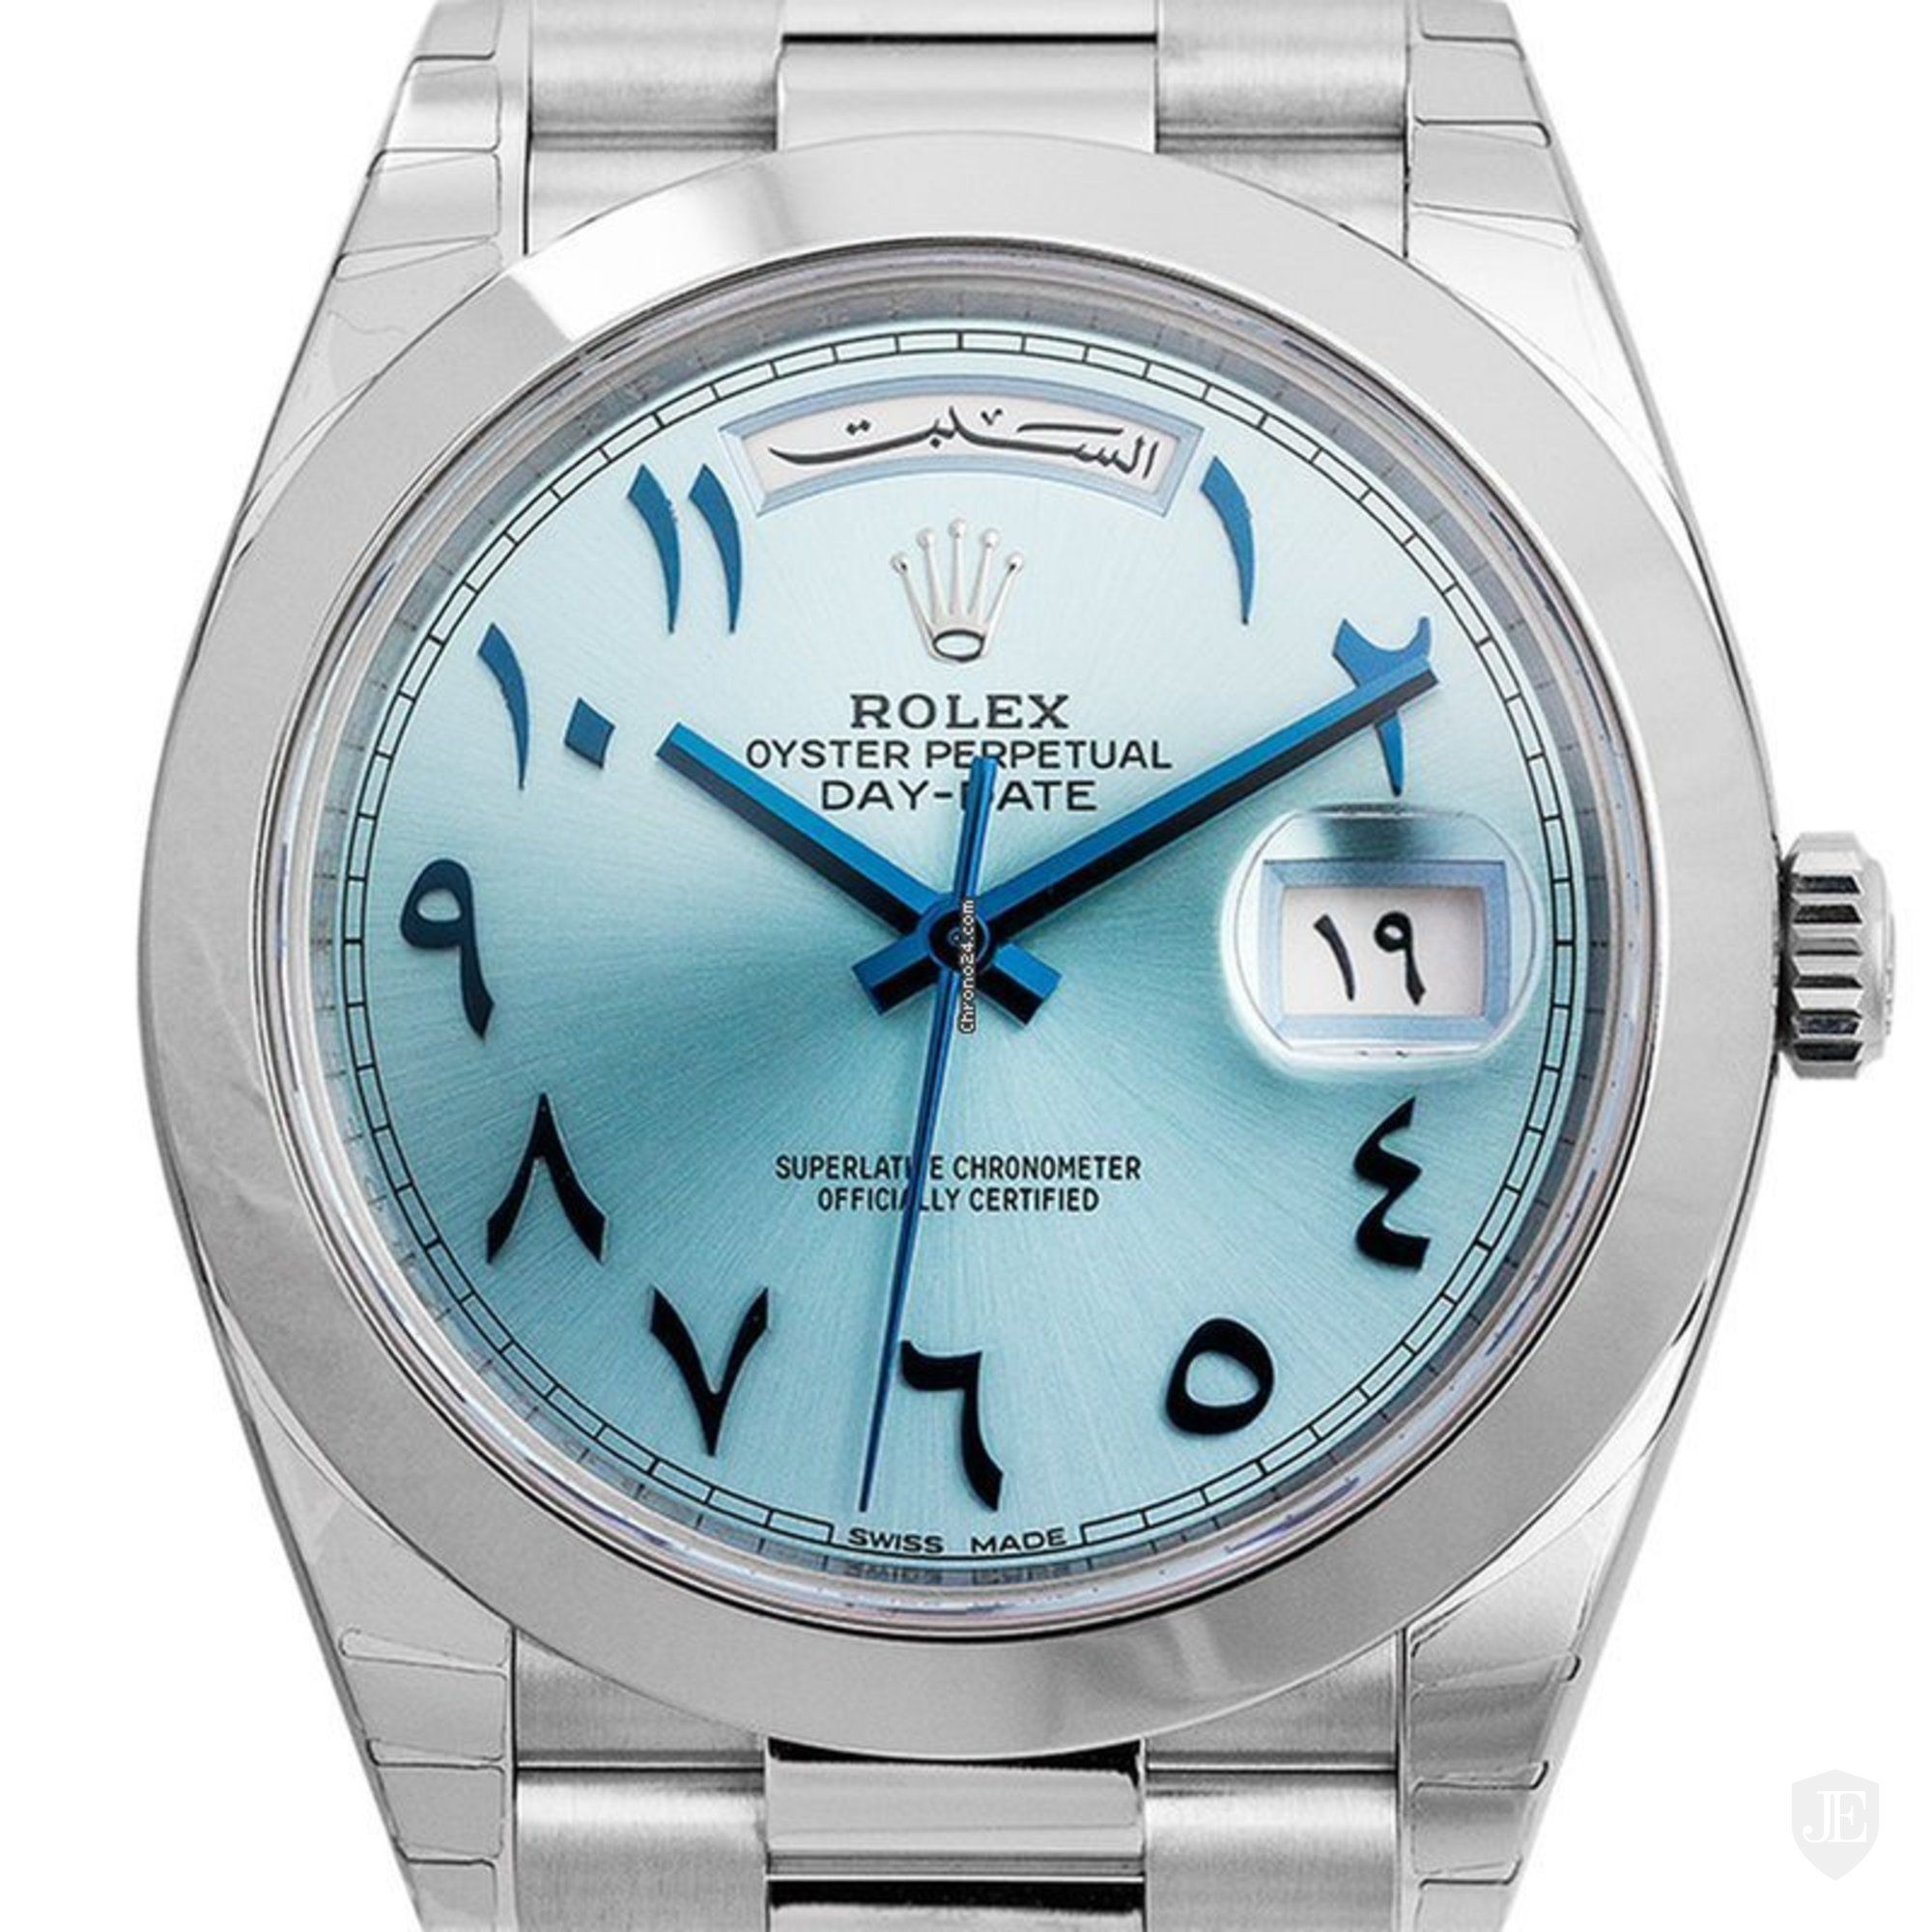 Rolex Day-Date 40 Indian/Arabic Dial. Special Edition in Dubai ...